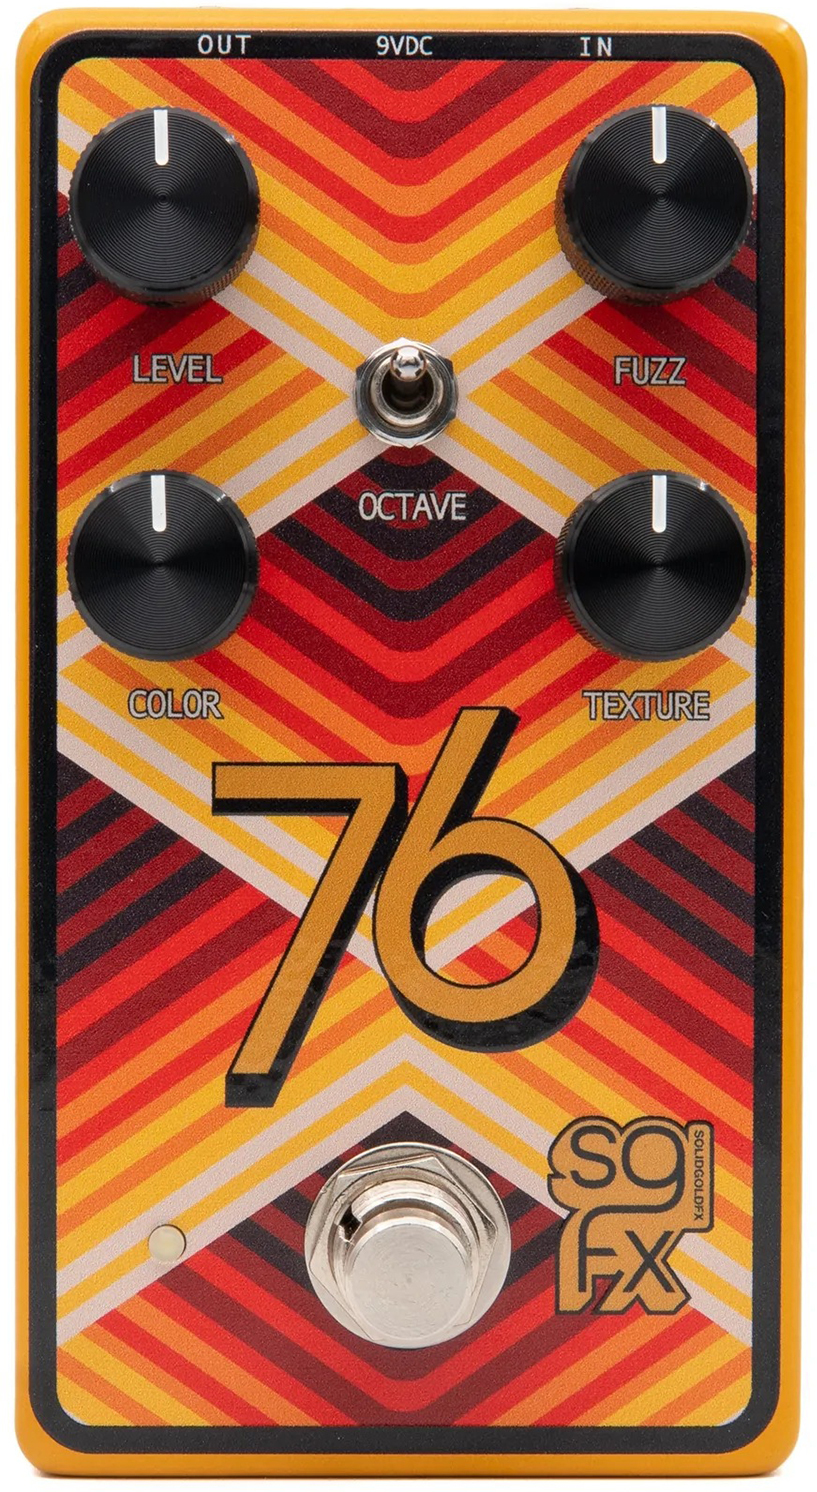 Solidgoldfx 76 Mkii Octave-up Fuzz - Pedal overdrive / distorsión / fuzz - Main picture